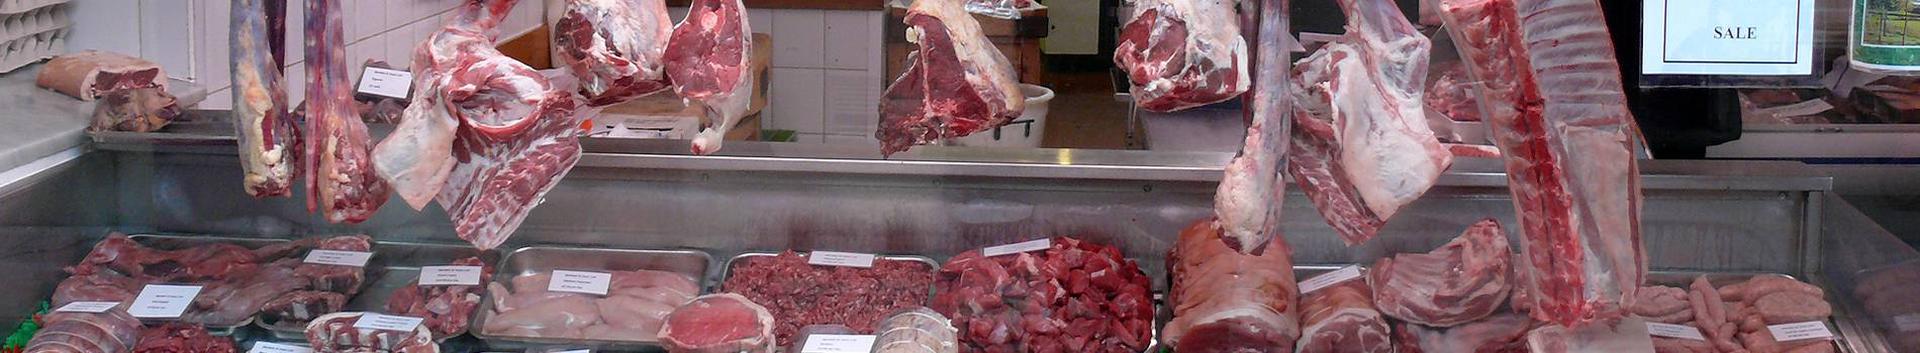 Meat industry, the Food Industry, Sale of meat